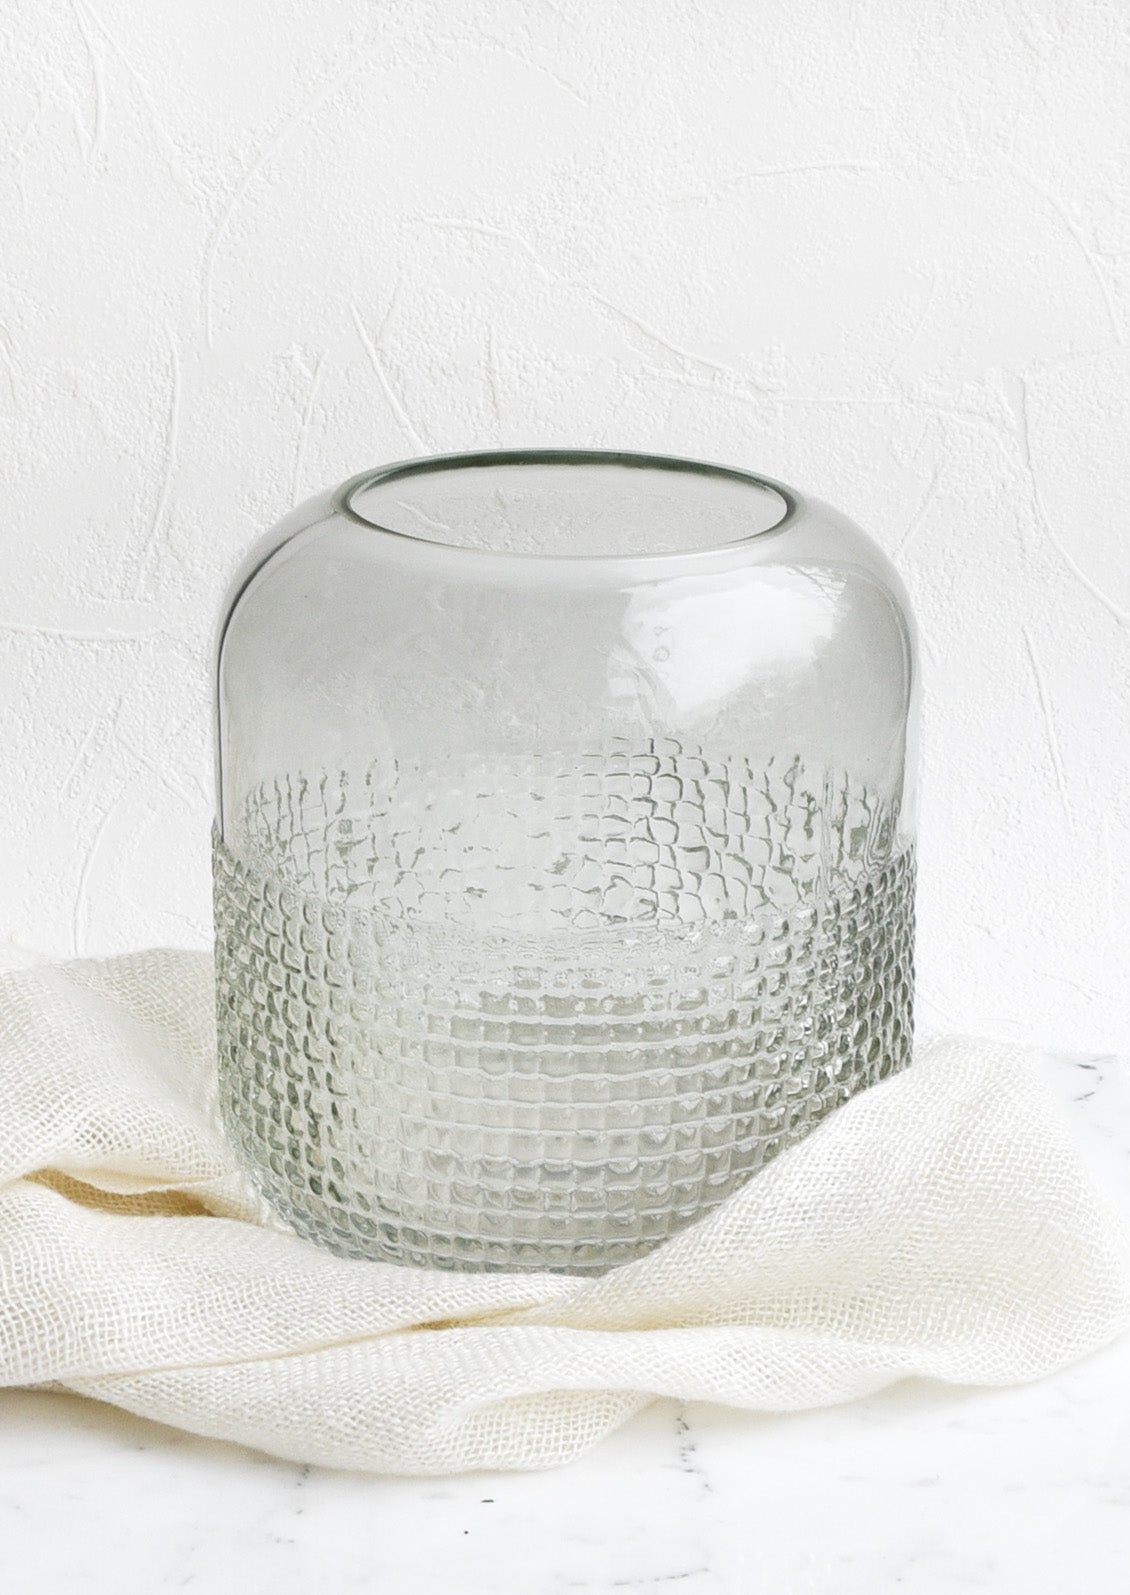 A glass vase with pyramid grid texture on lower half.